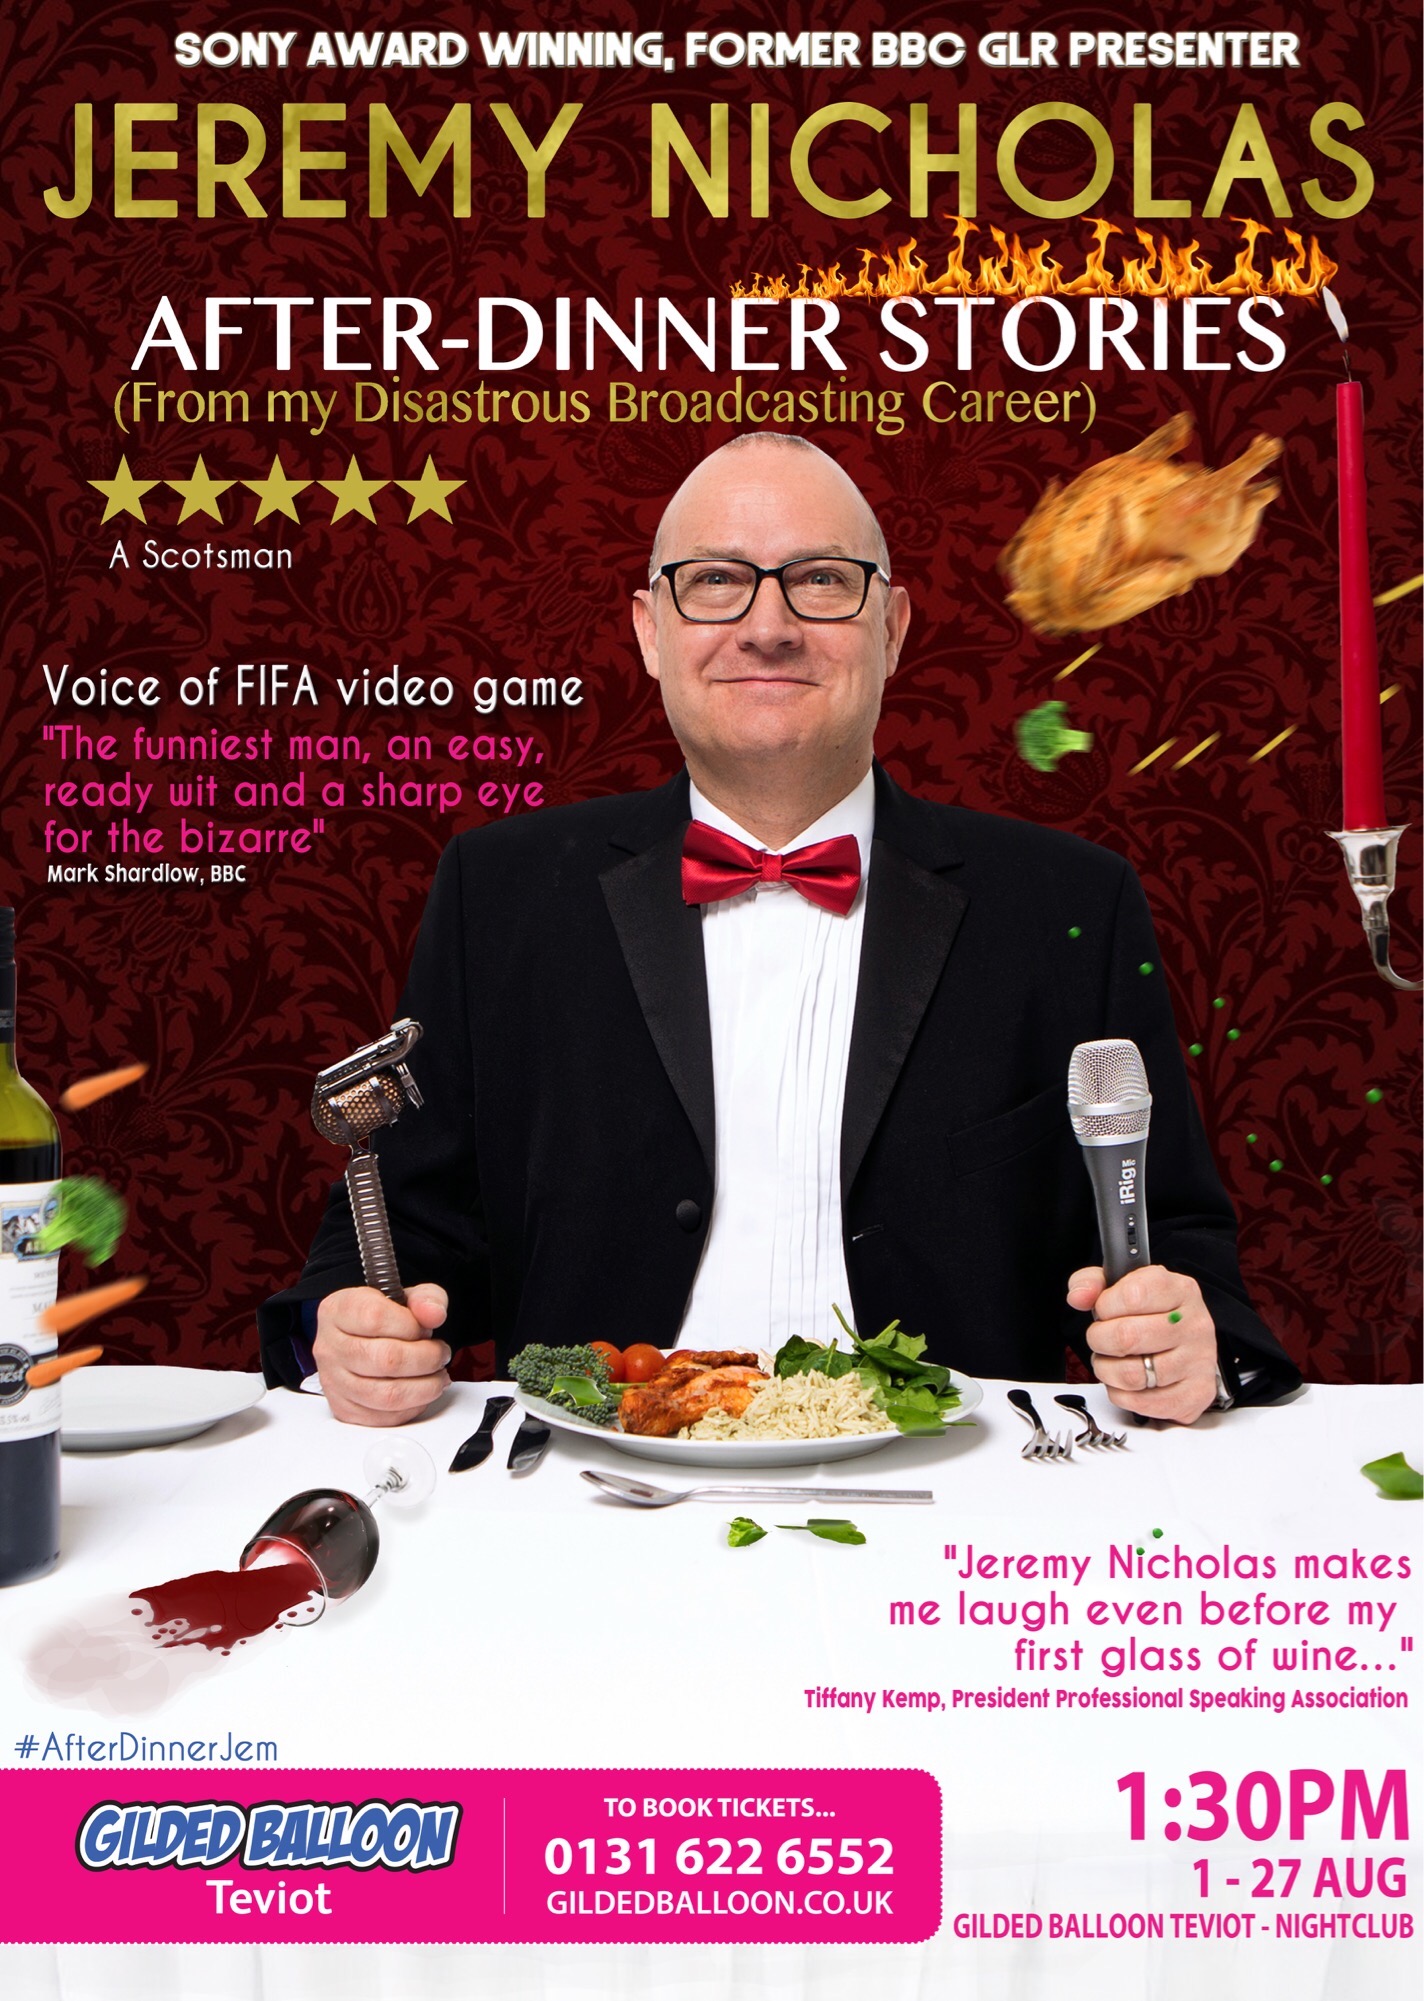 The poster for Jeremy Nicholas: After Dinner Stories (From My Disastrous Broadcasting Career)